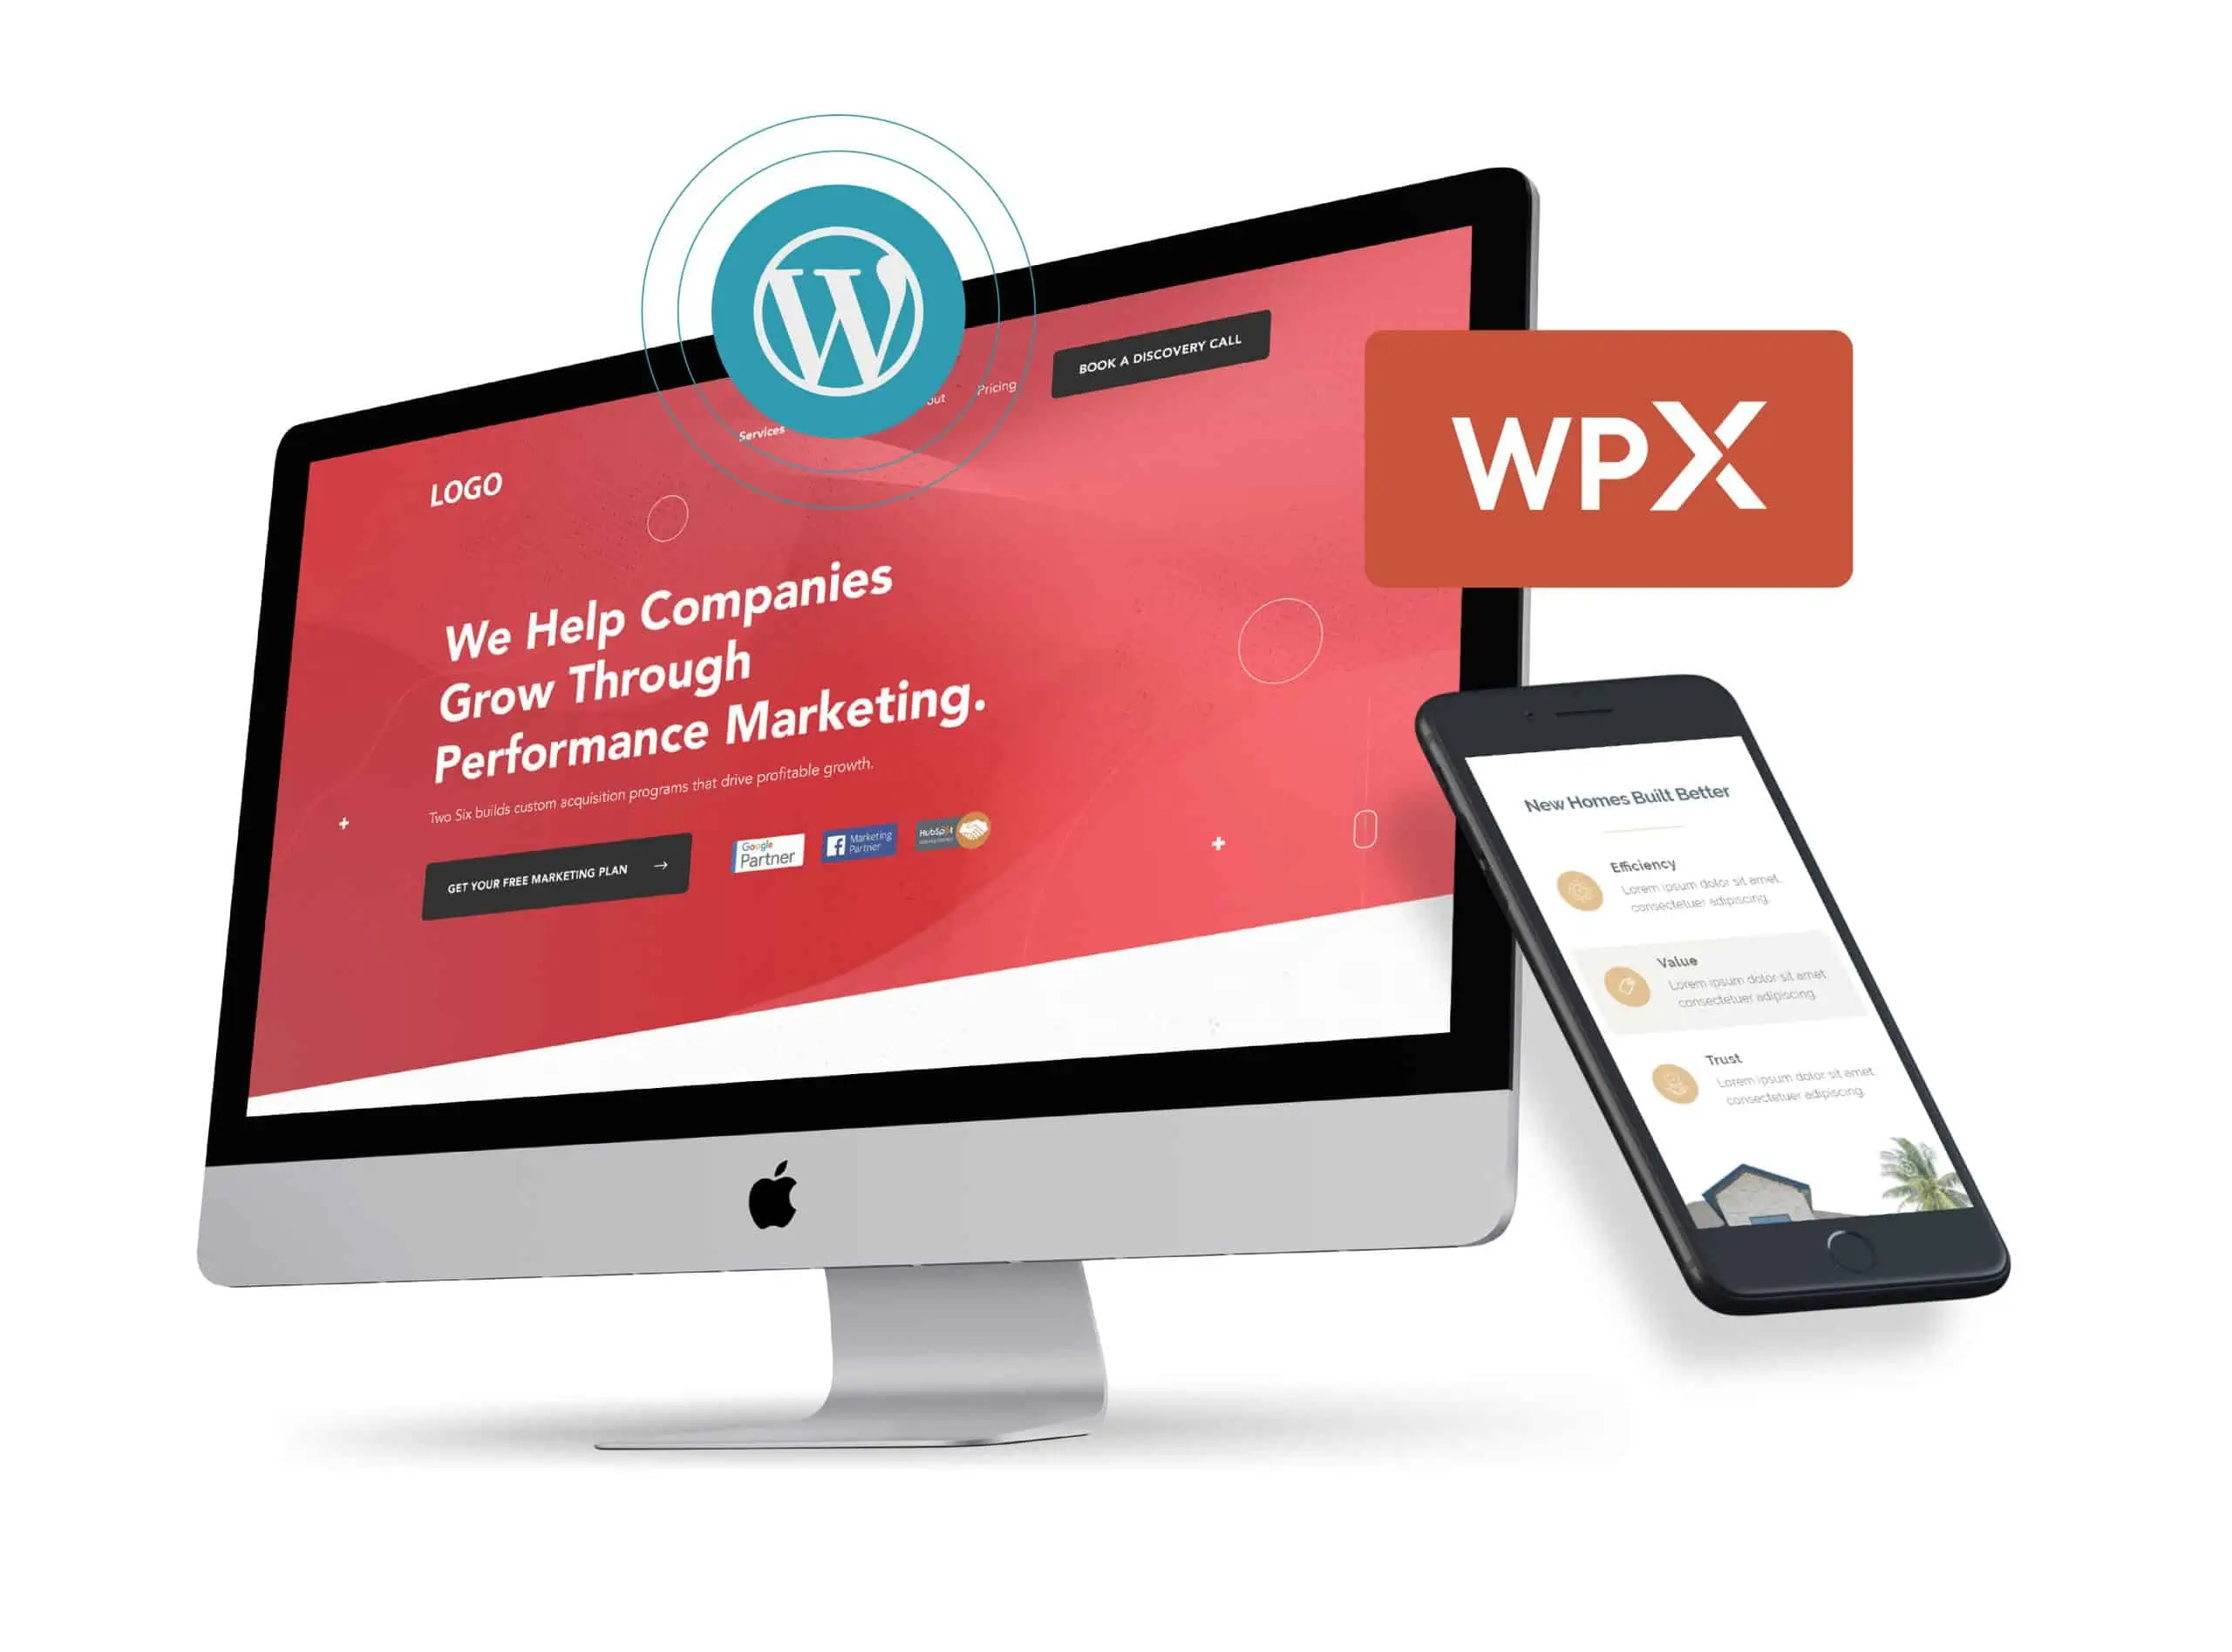 Converting From Ghost To Wordpress | WPXStudios